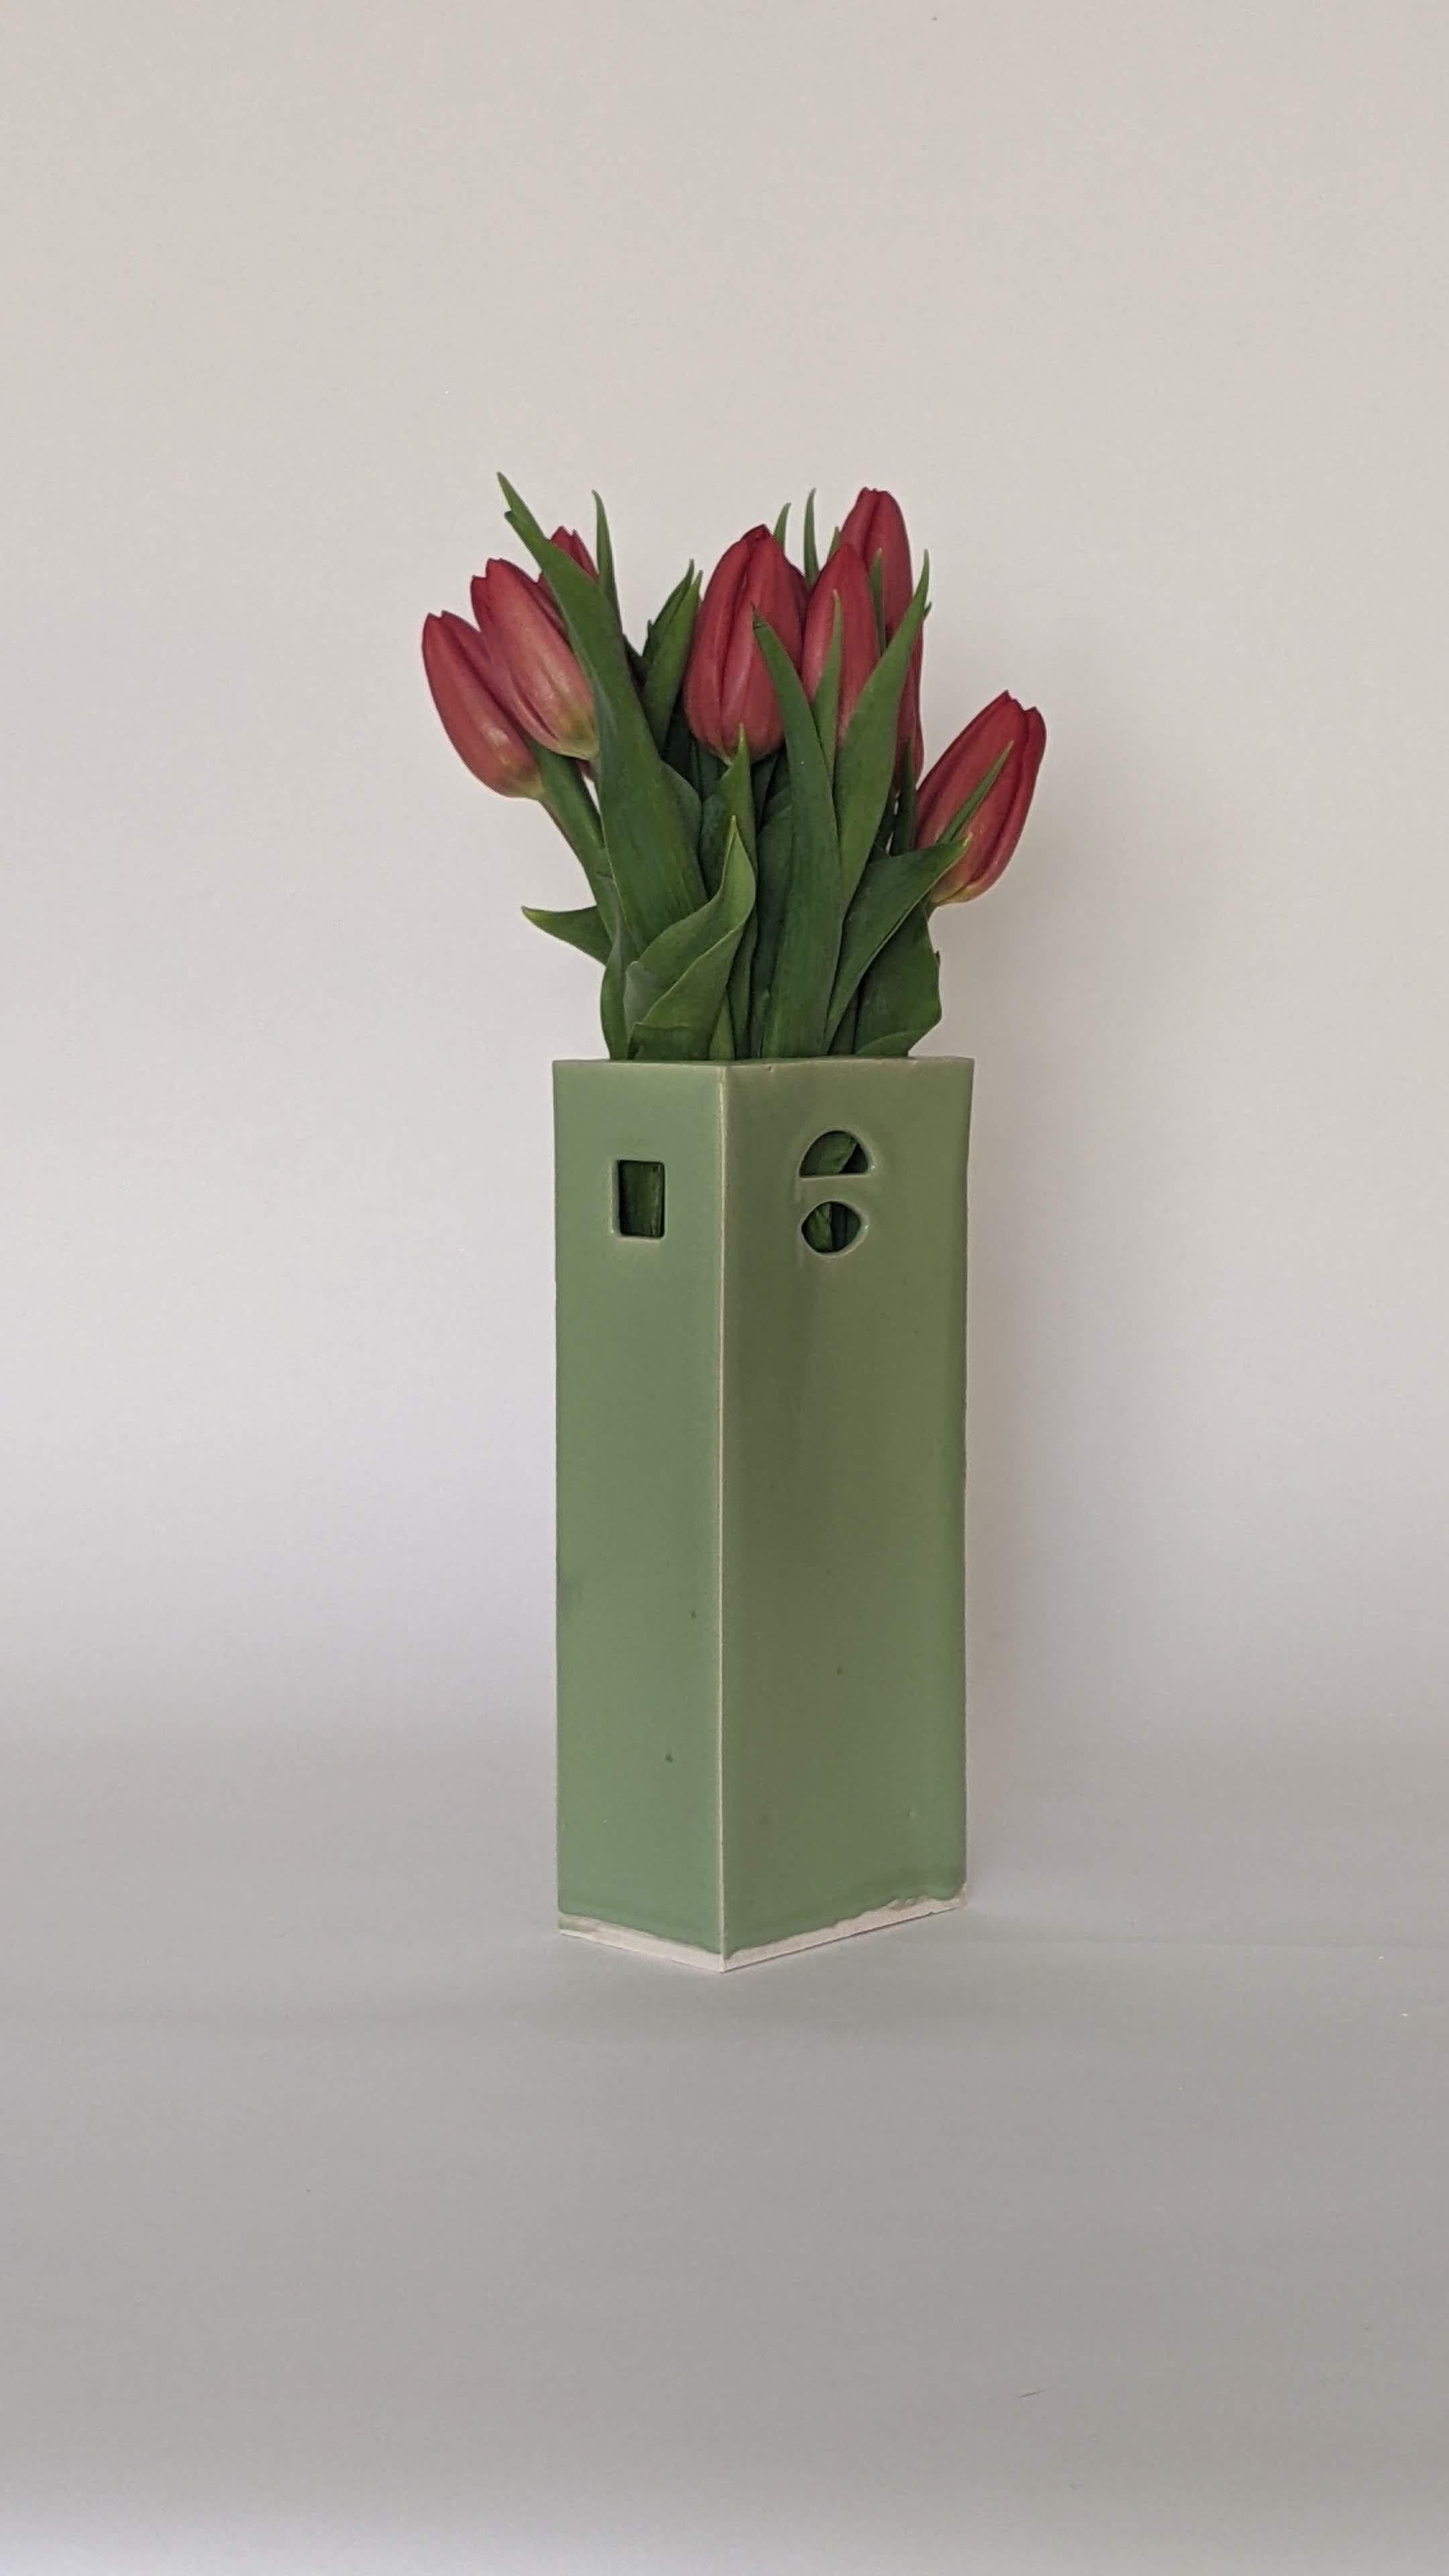 This meticulously crafted glazed ceramic vase is skillfully handcrafted by James Hicks. The design features a sleek modern rectangle hollow brick form with openings inspired by the architectural elements of Louis Kahn's iconic buildings for the